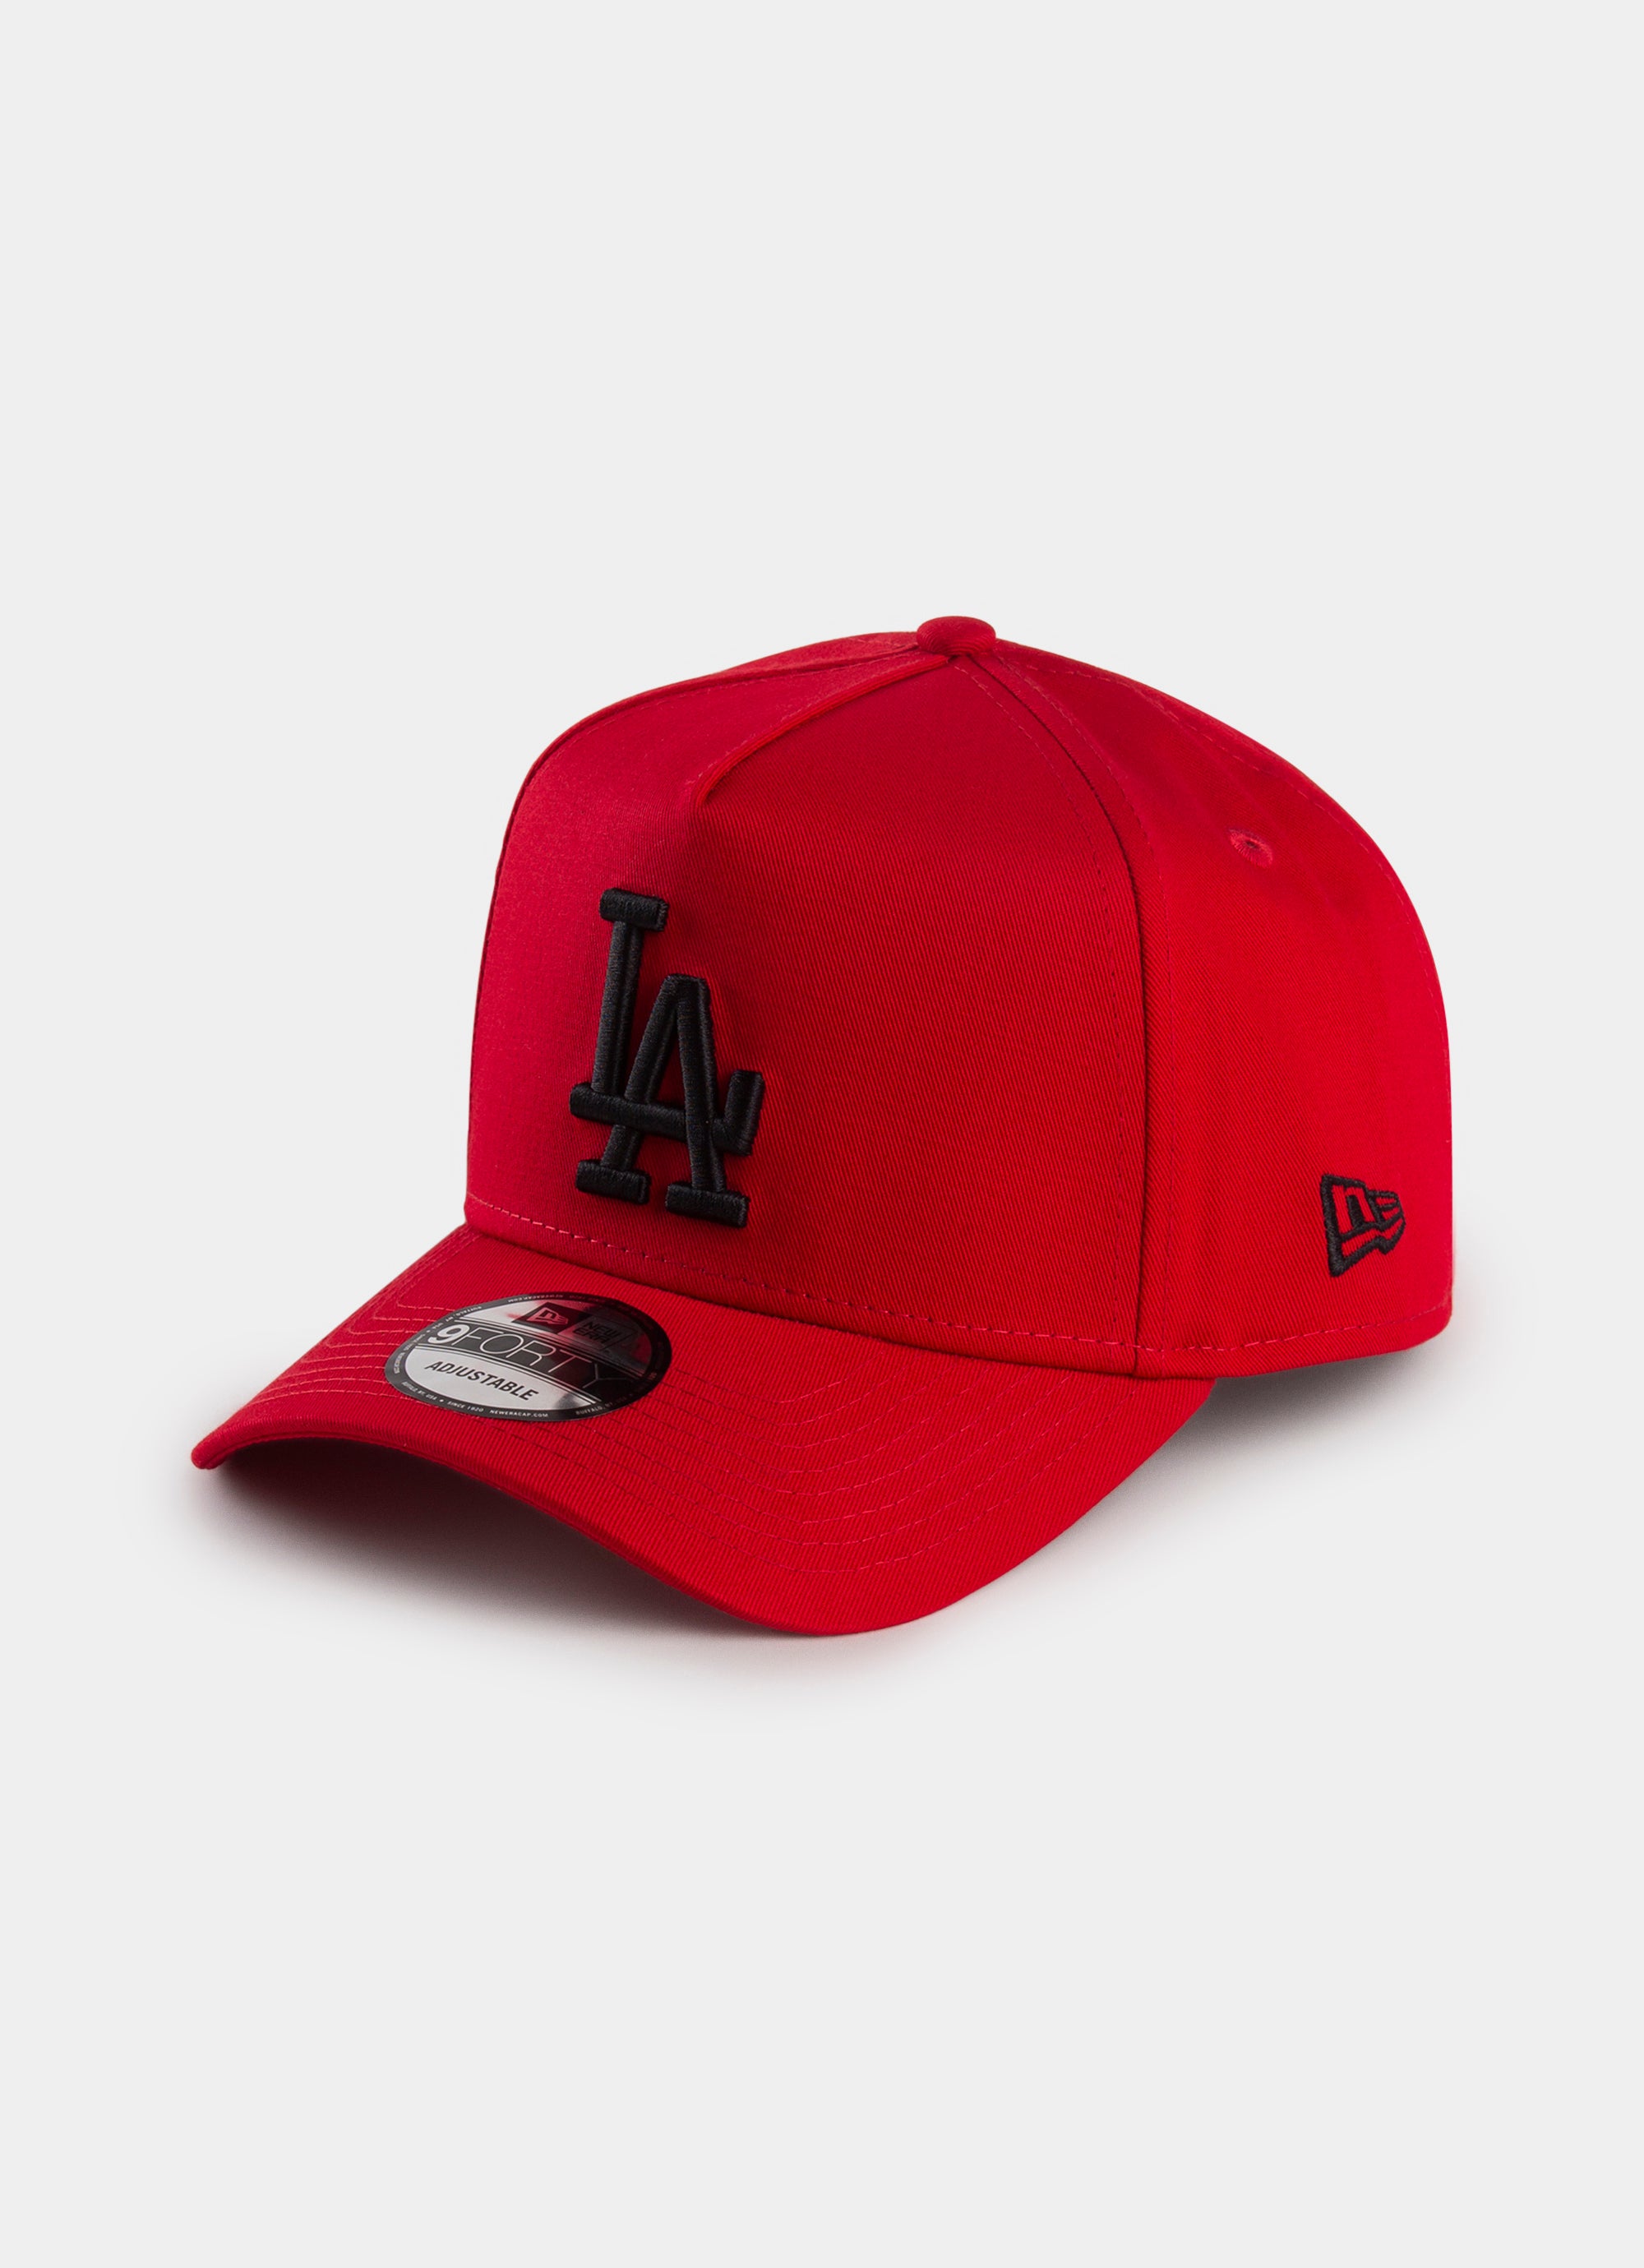 MLB Red Velvet 59Fifty Fitted Hat Collection by MLB x New Era  Strictly  Fitteds